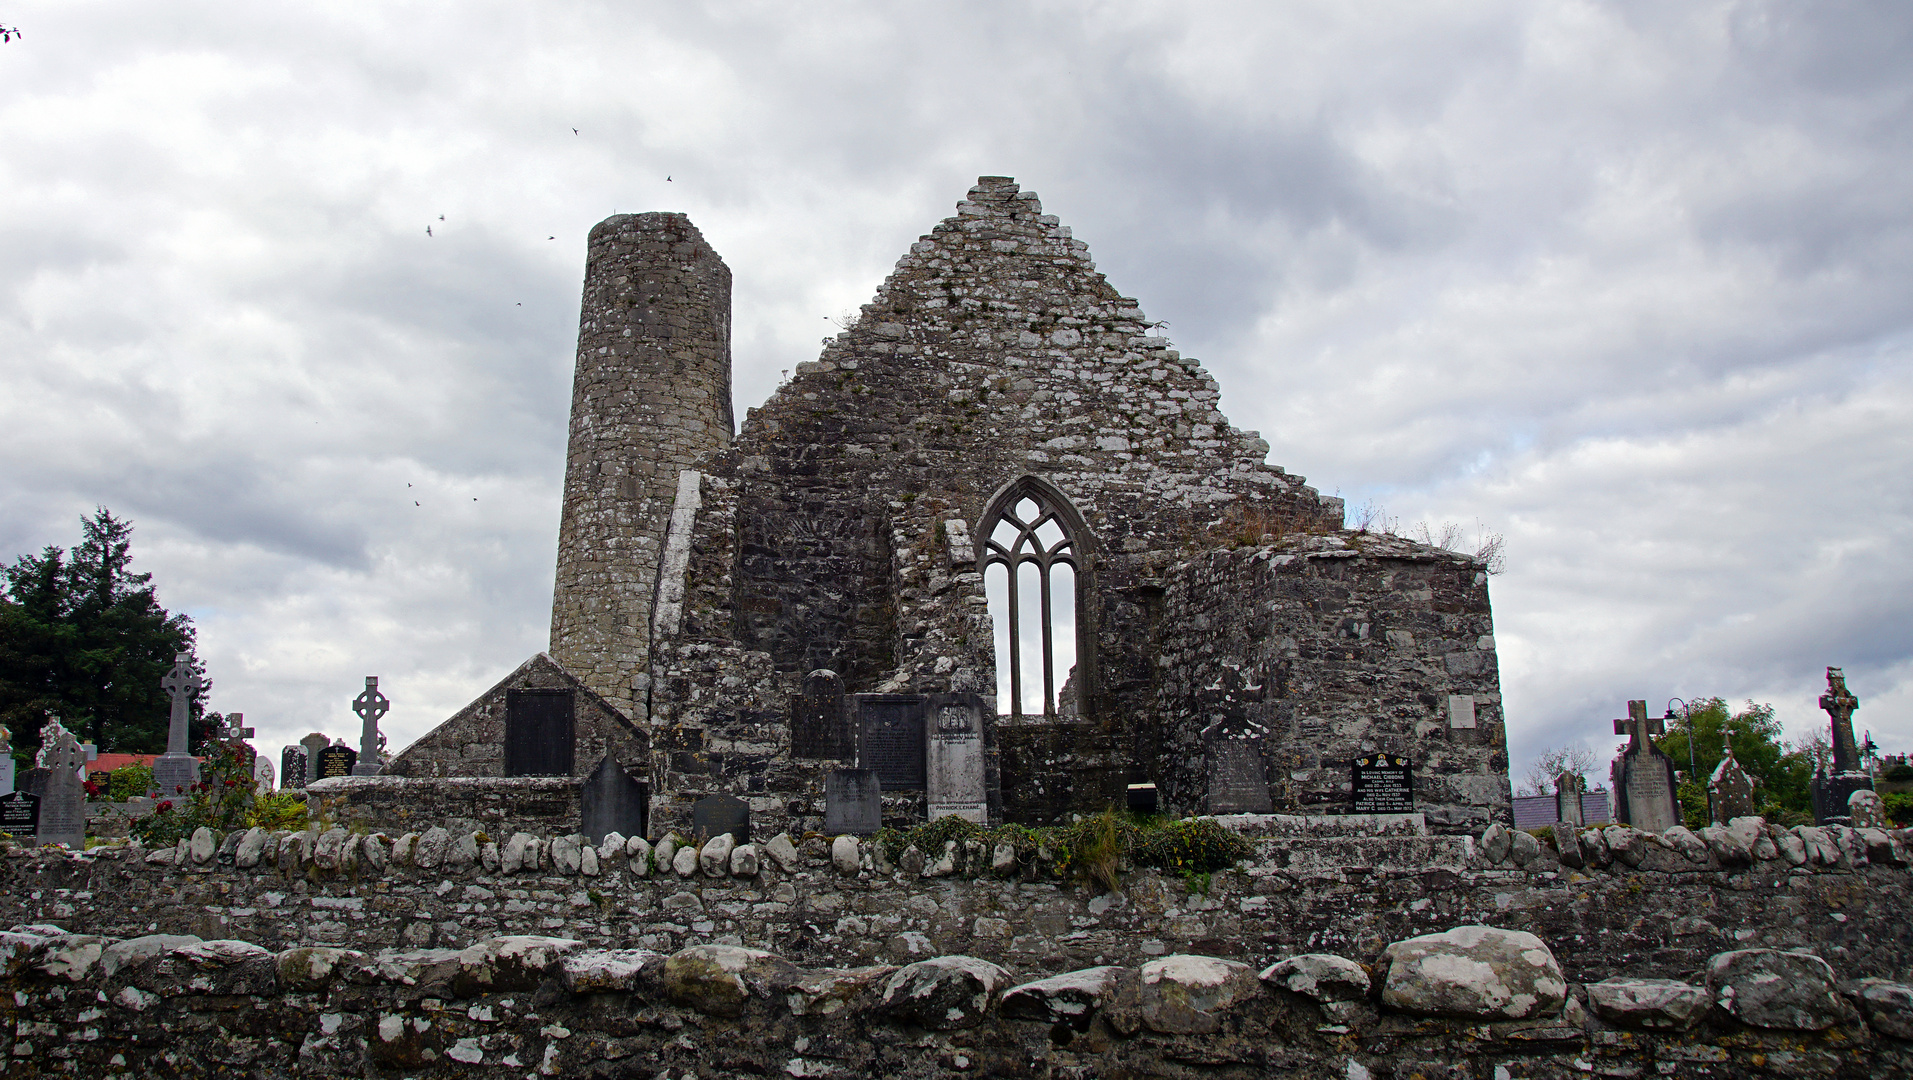 Aghagower's round tower and abbey